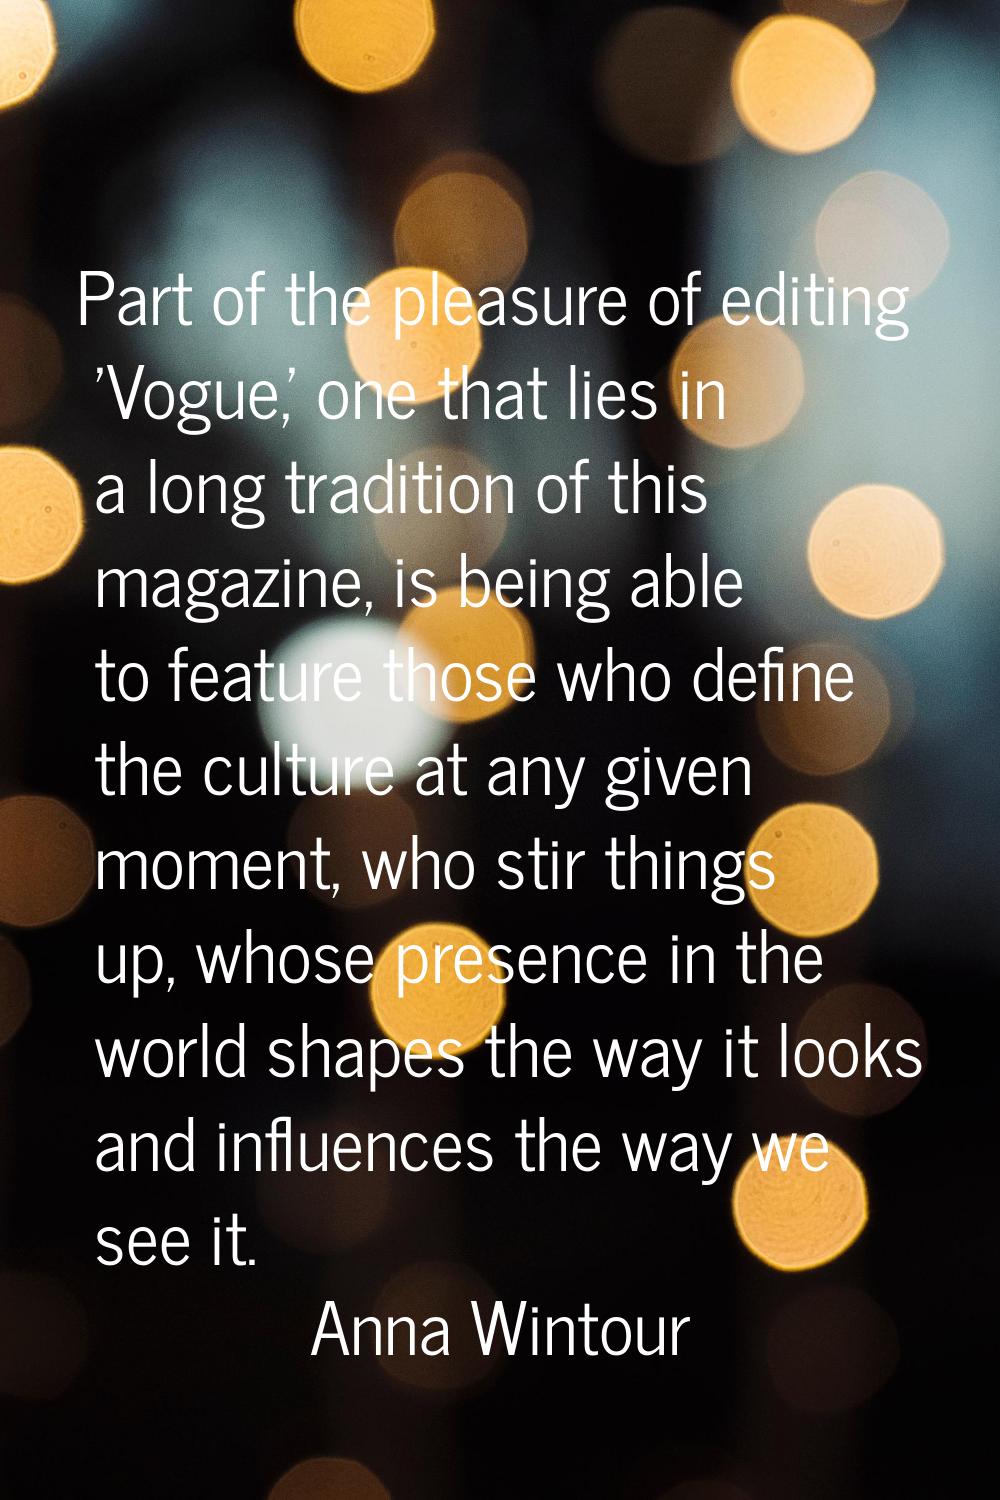 Part of the pleasure of editing 'Vogue,' one that lies in a long tradition of this magazine, is bei